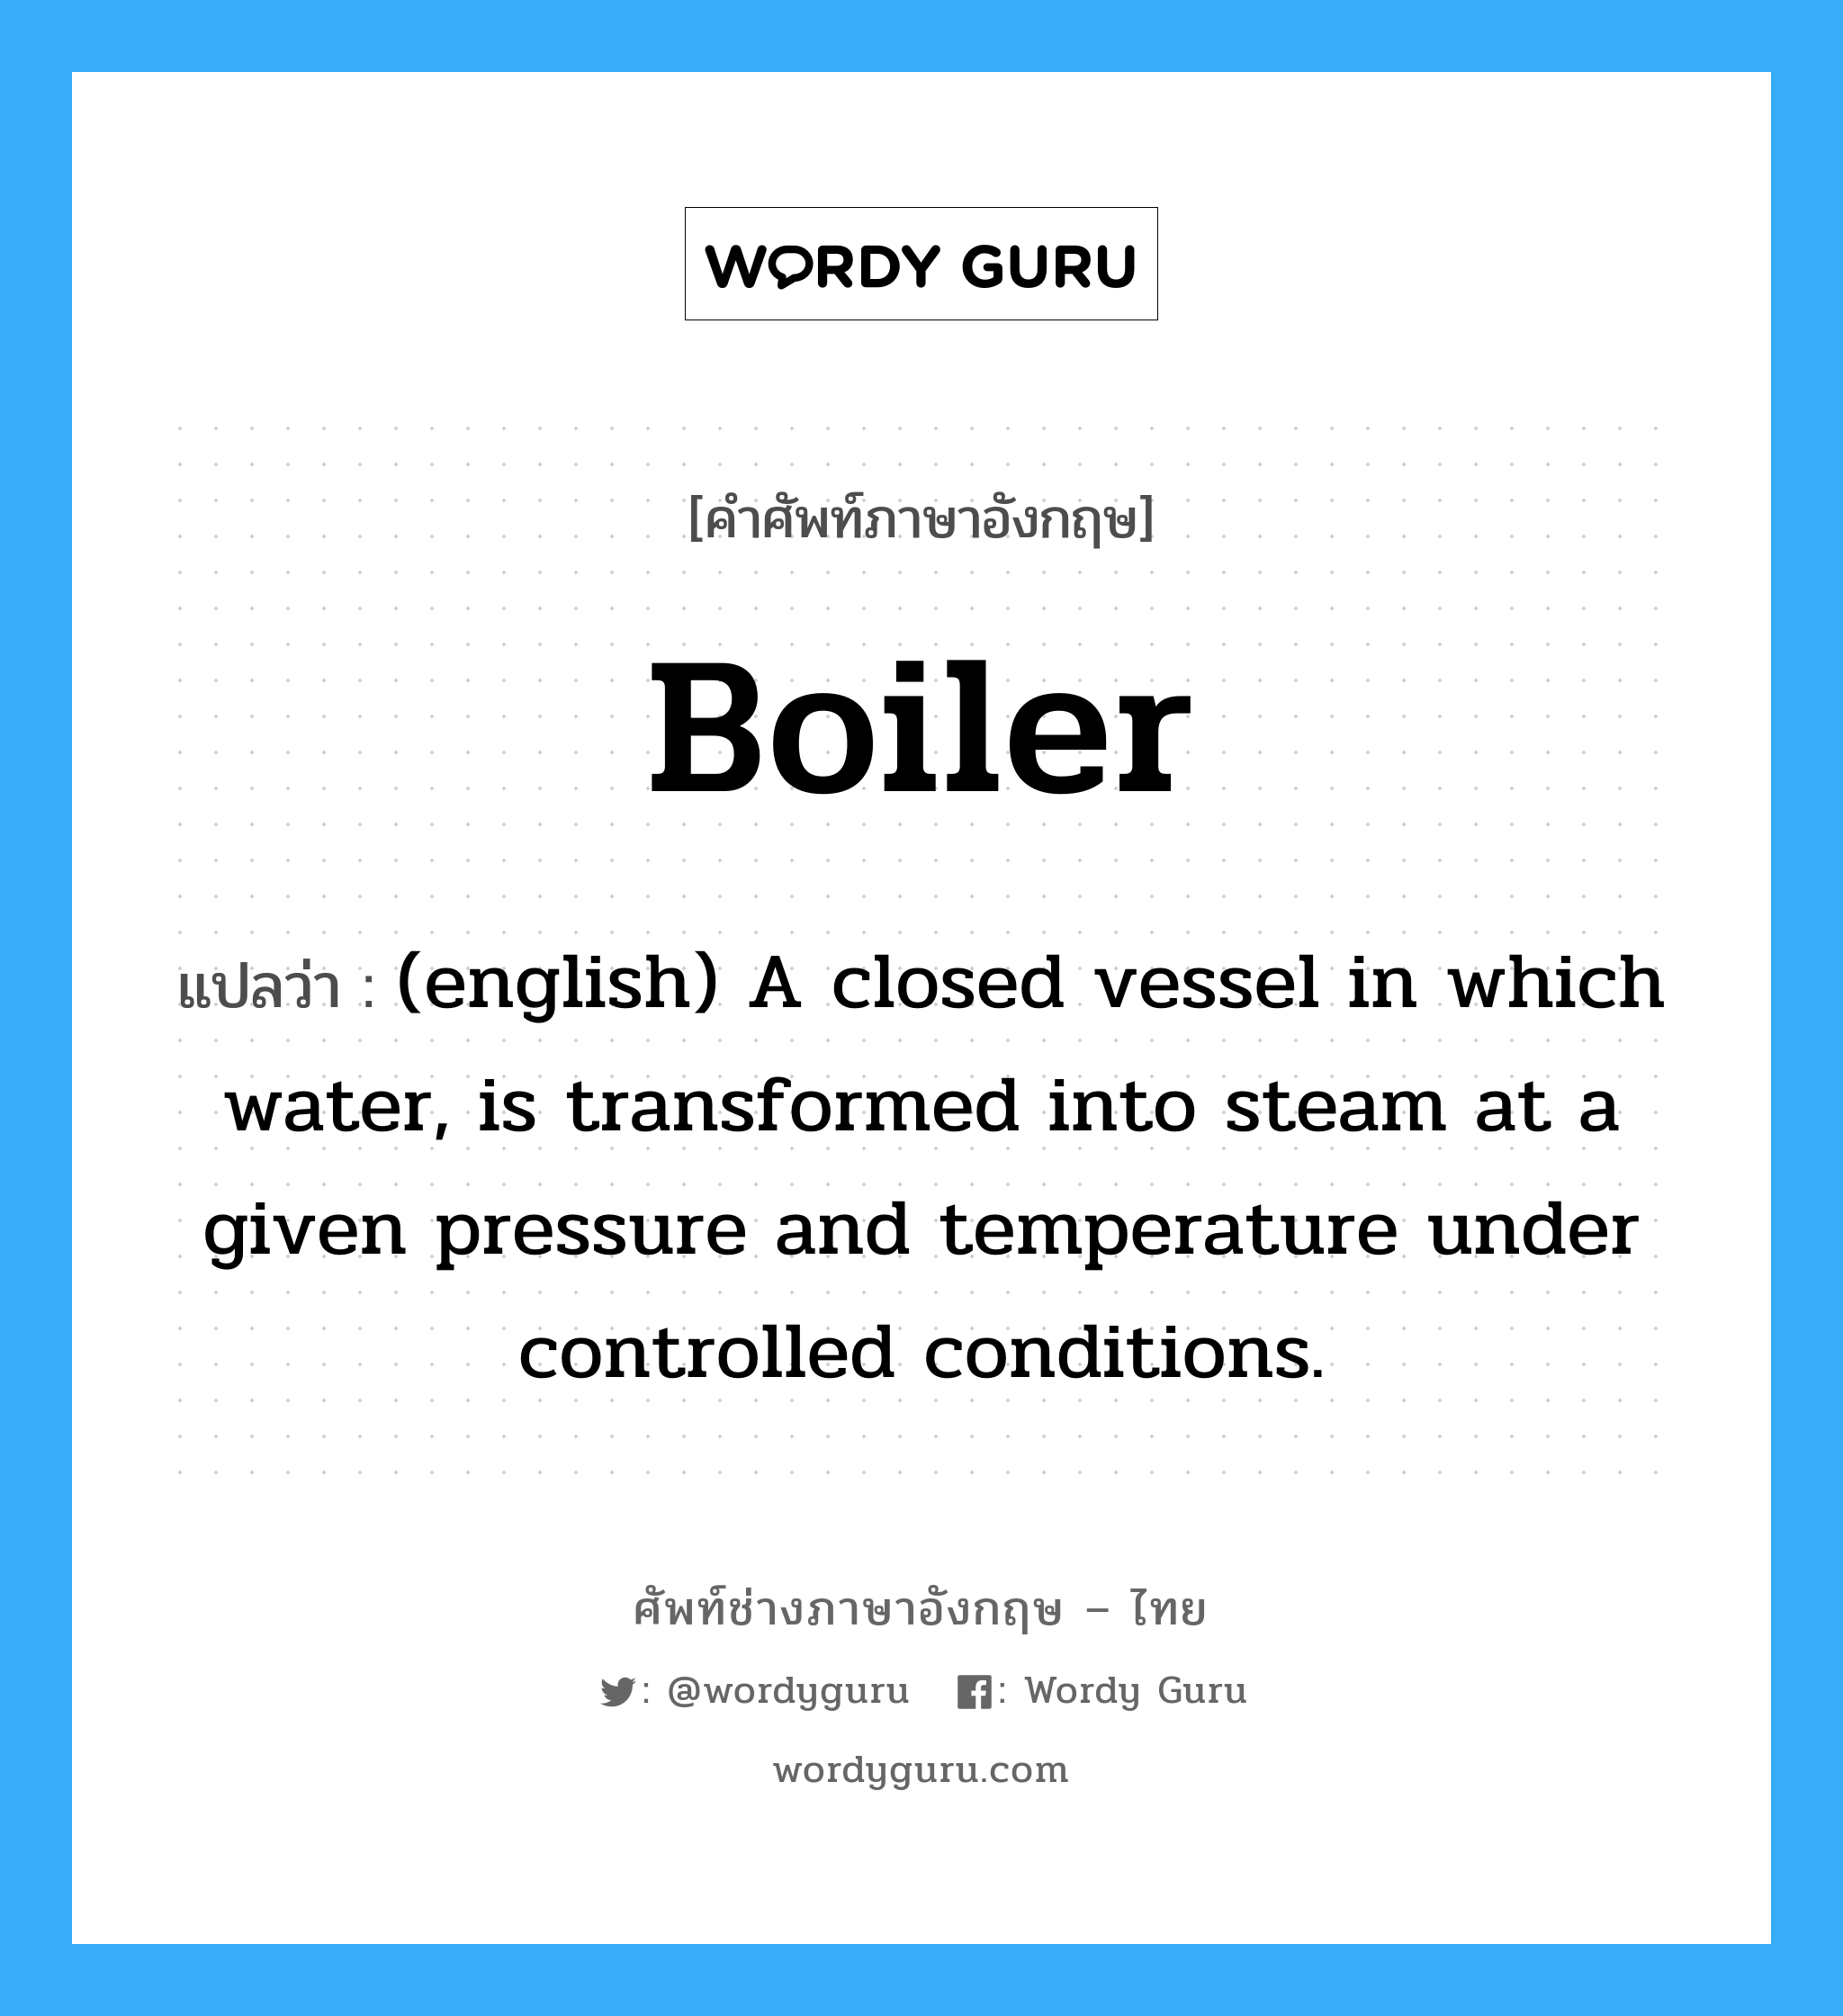 Boiler แปลว่า?, คำศัพท์ช่างภาษาอังกฤษ - ไทย Boiler คำศัพท์ภาษาอังกฤษ Boiler แปลว่า (english) A closed vessel in which water, is transformed into steam at a given pressure and temperature under controlled conditions.